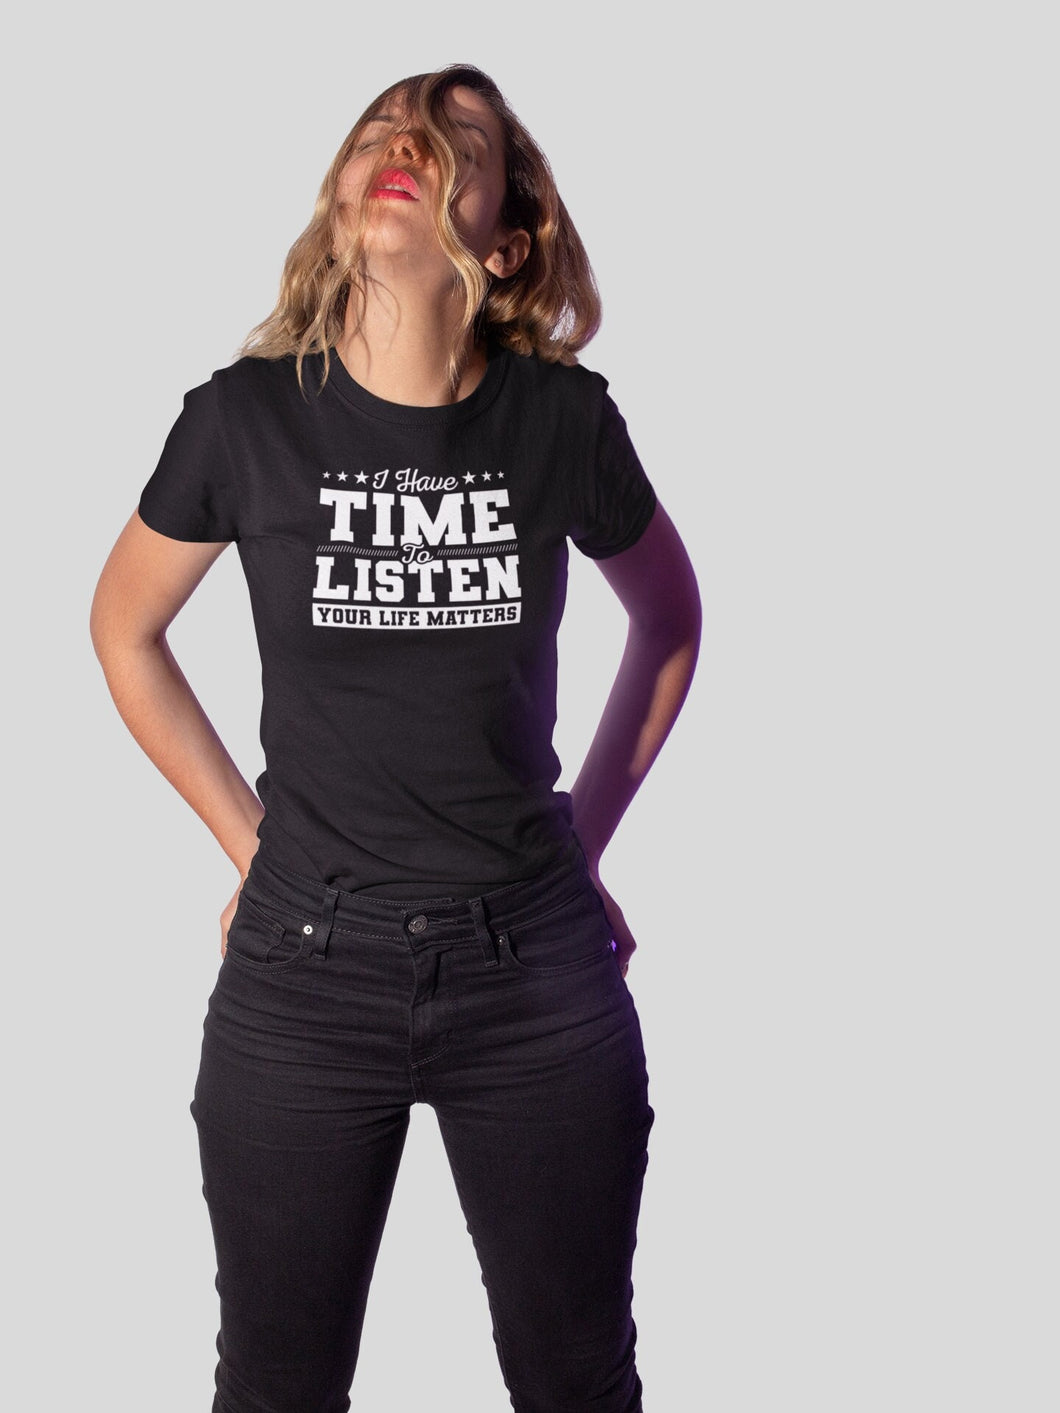 I Have Time To Listen Your Life Matters Shirt, Suicide Prevention, Suicide Awareness, Mental Health Shirt